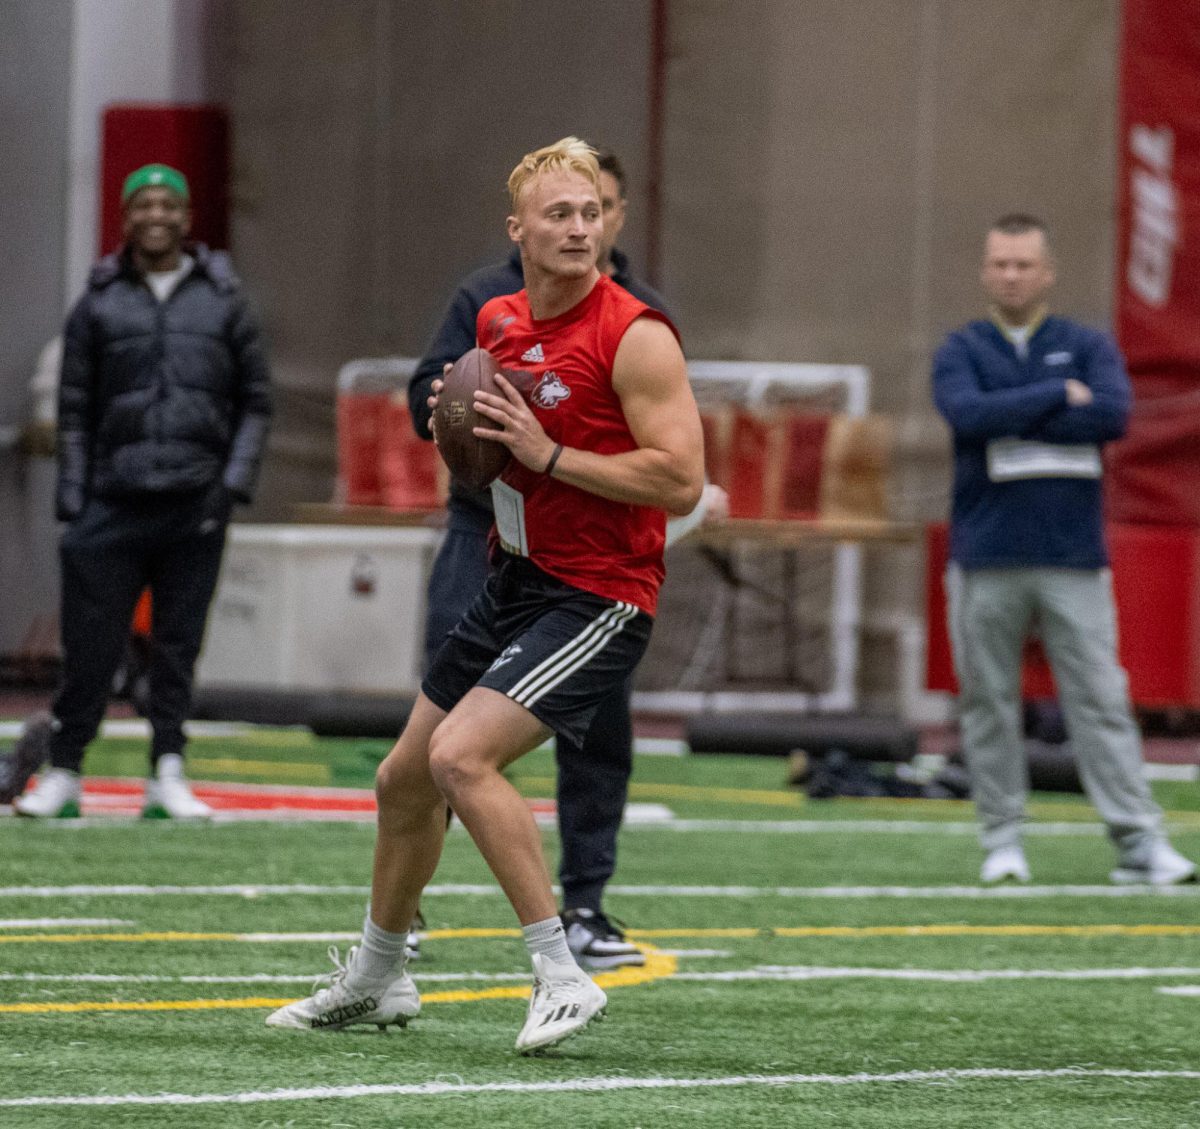 Former+NIU+quarterback+Rocky+Lombardi+drops+back+during+passing+drills+at+Thursdays+Pro+Day+inside+the+Chessick+Practice+Center.+Lombardi+worked+out+in+front+of+scouts+from+at+least+11+NFL+teams.+%28Tim+Dodge+%7C+Northern+Star%29